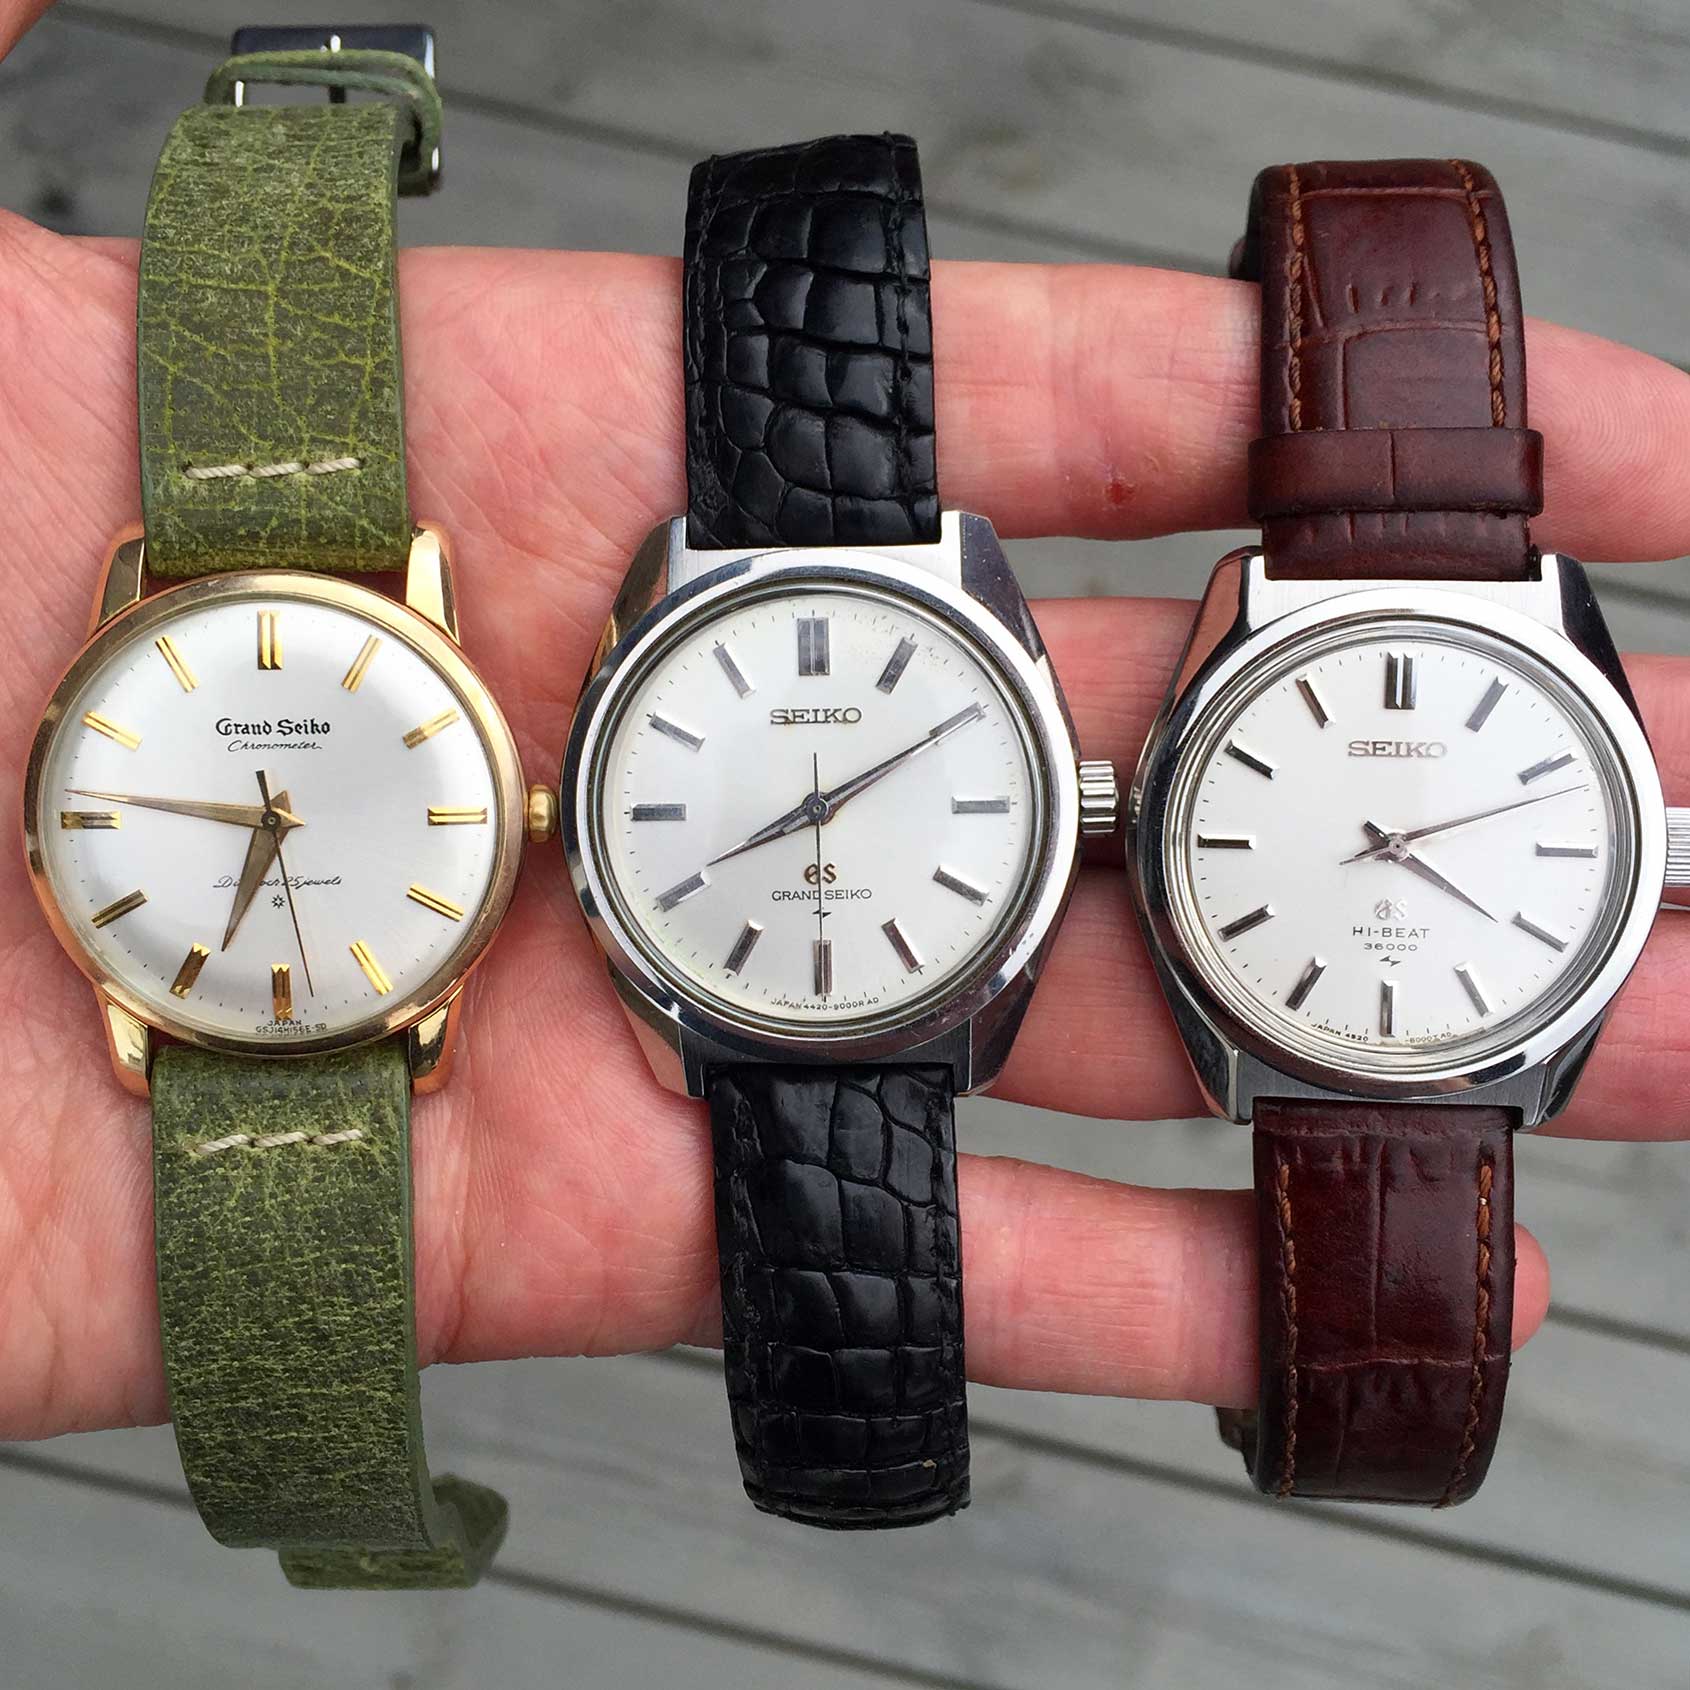 Ander's Vintage Grand Seiko Watch Collection